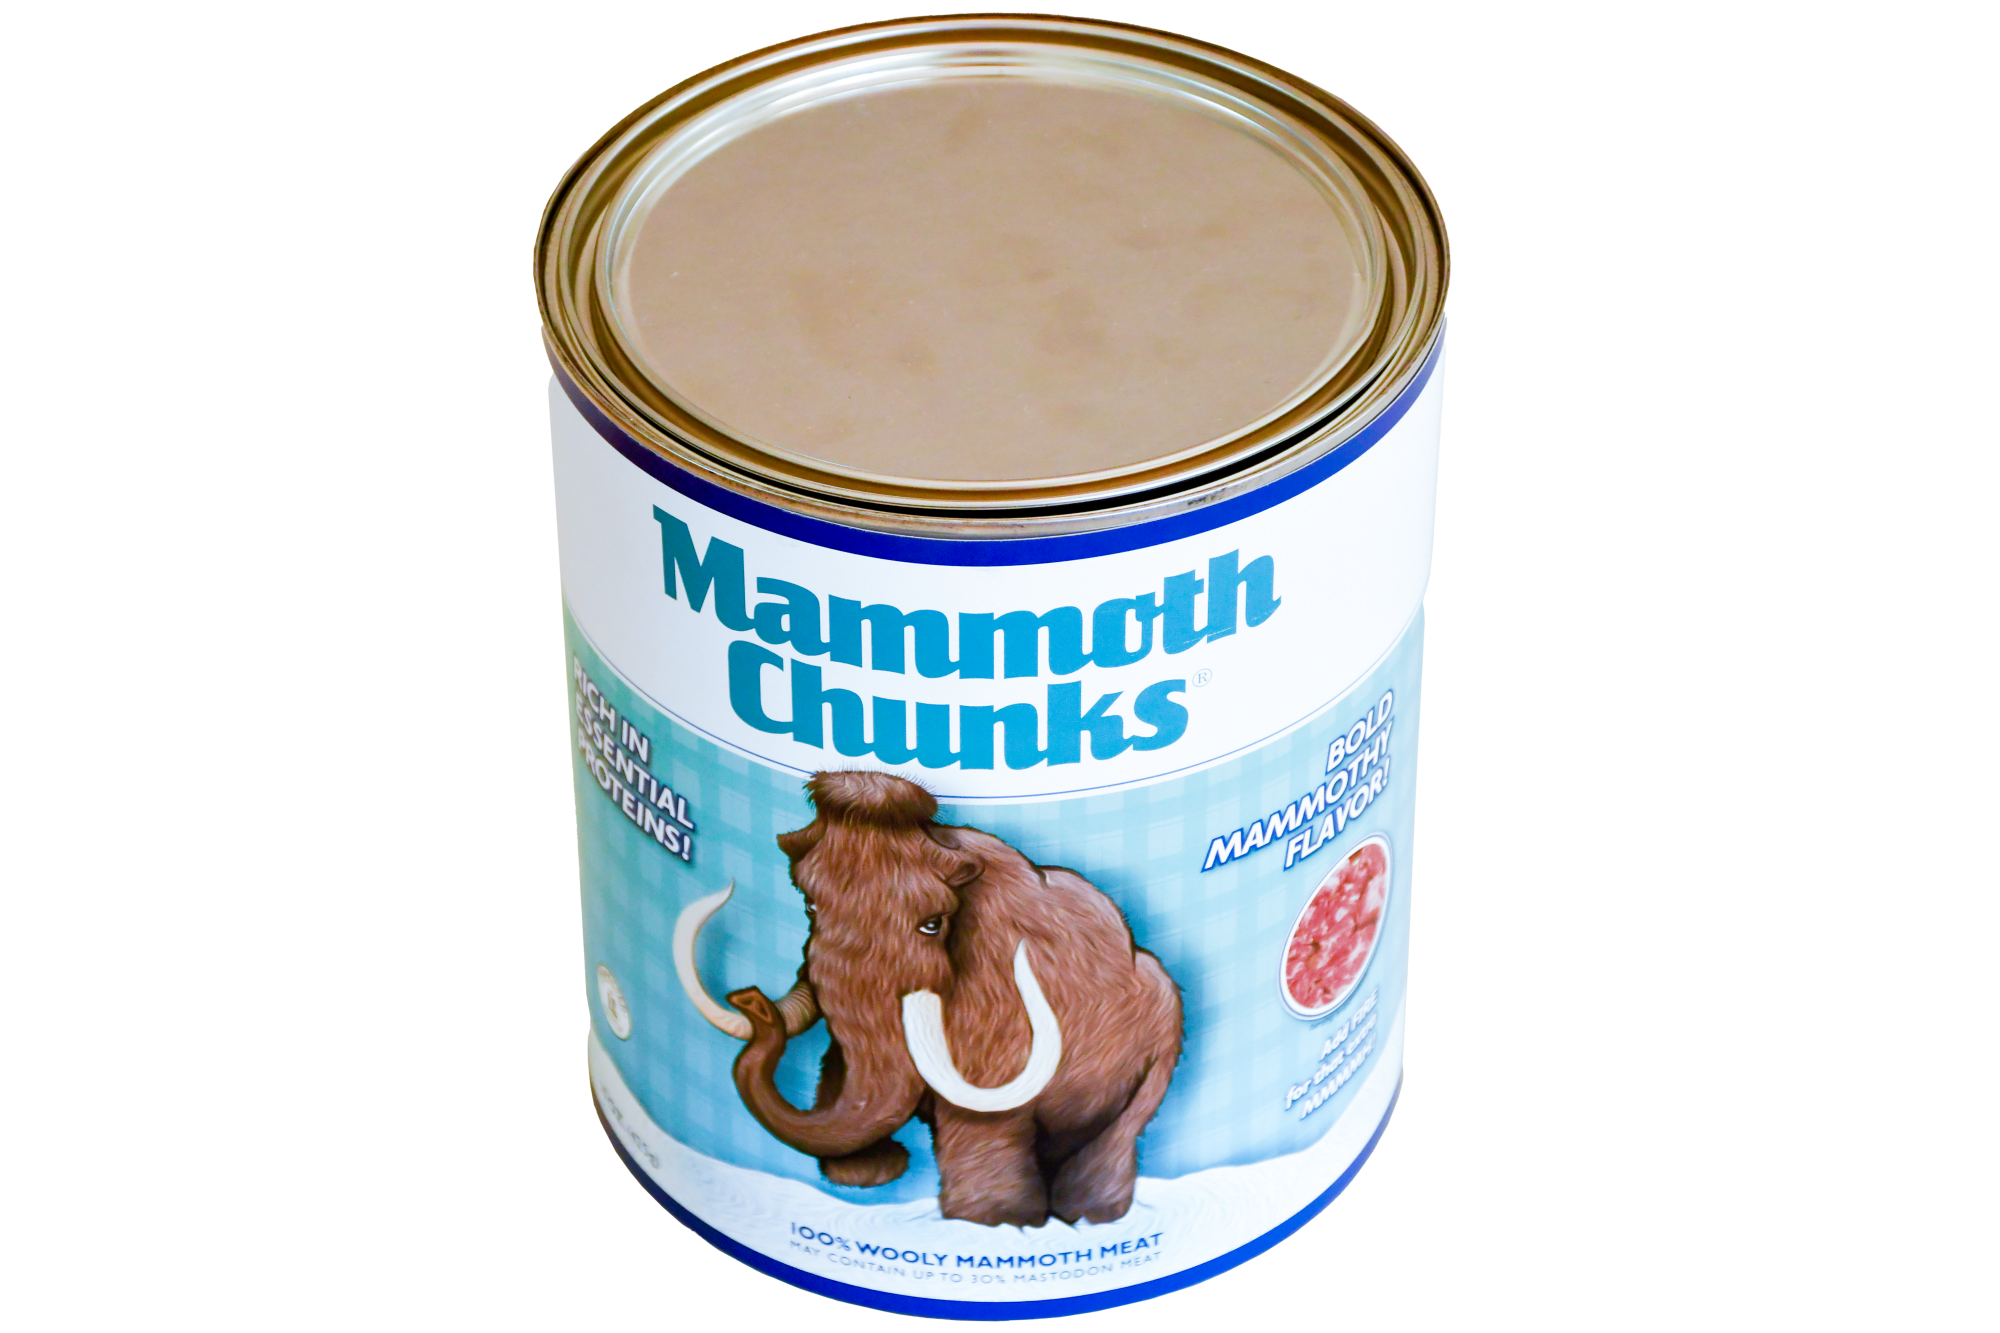 A container of Mammoth Chunks